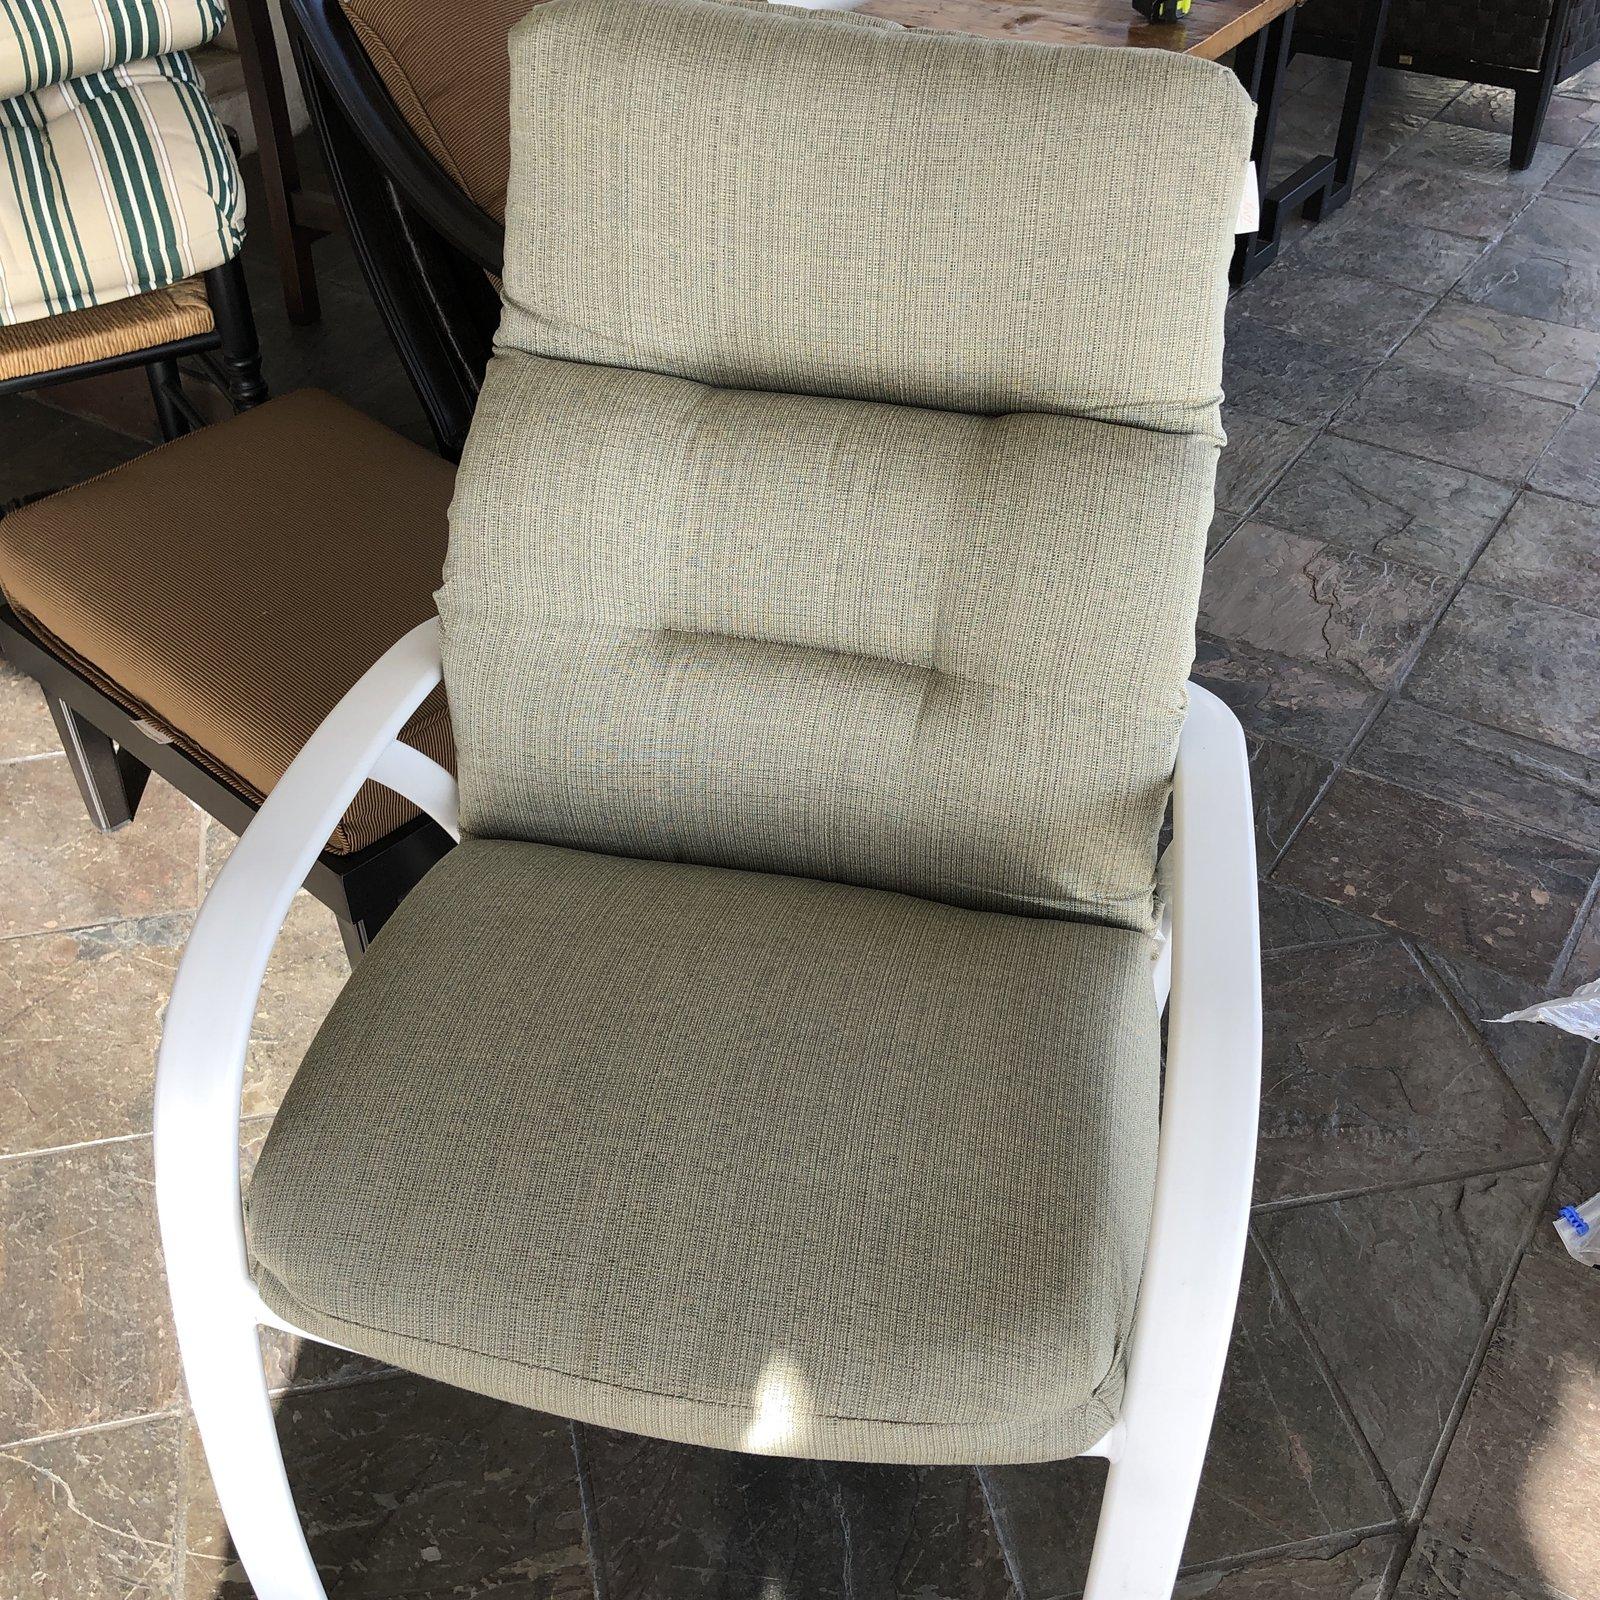 Tropitone Table, Four Chairs and Umbrella For Sale 3